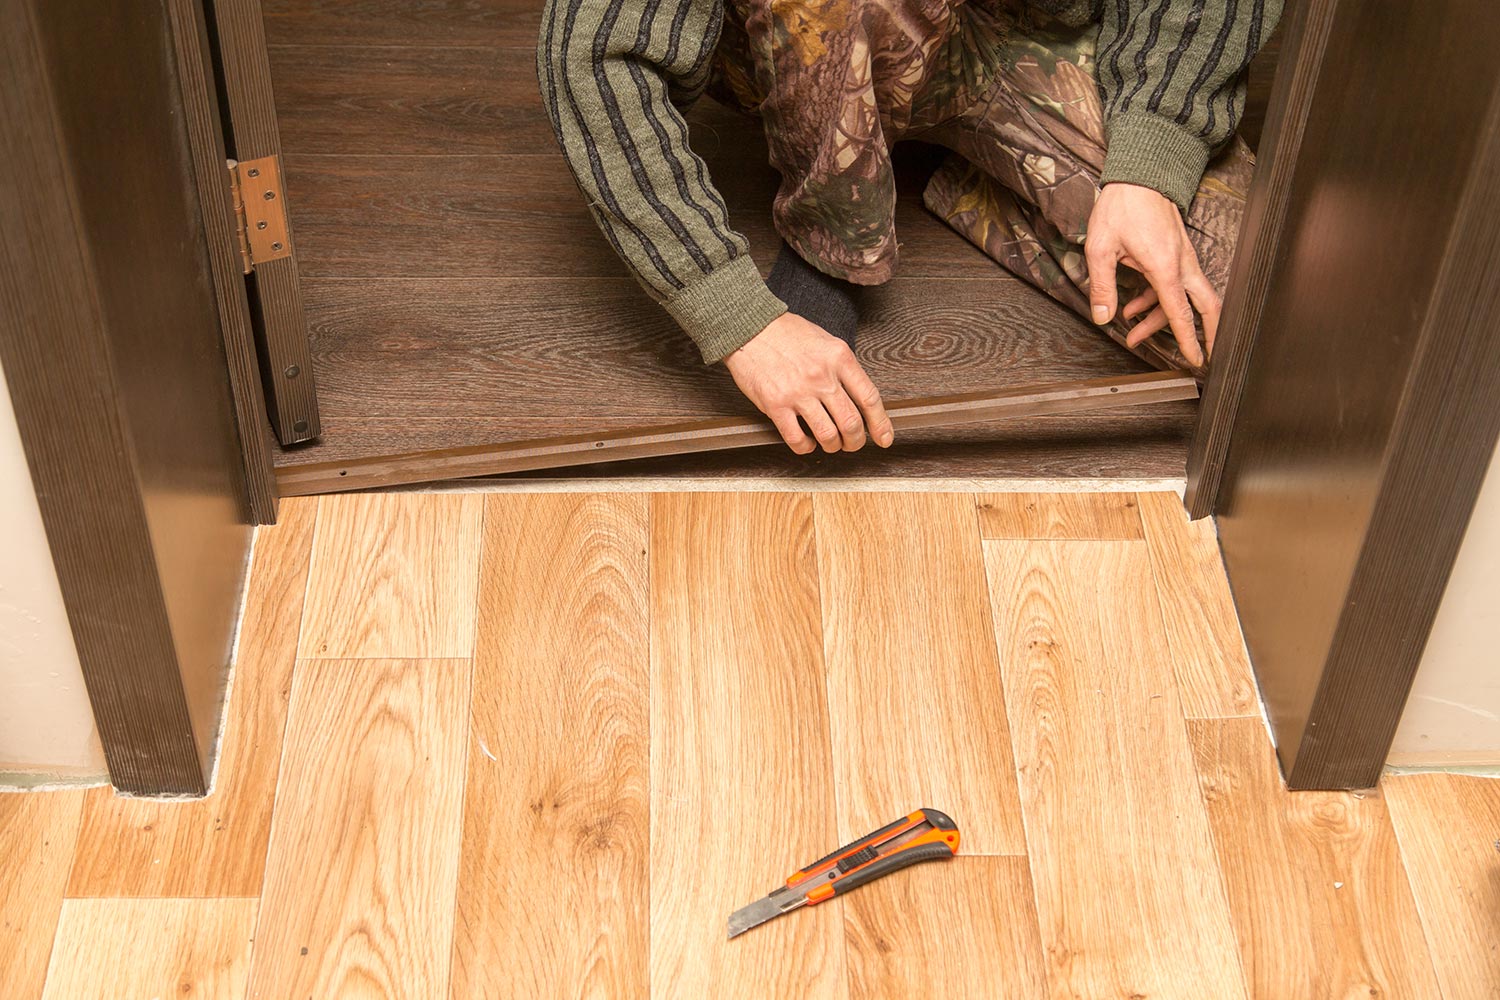 A man is making a threshold on the floor